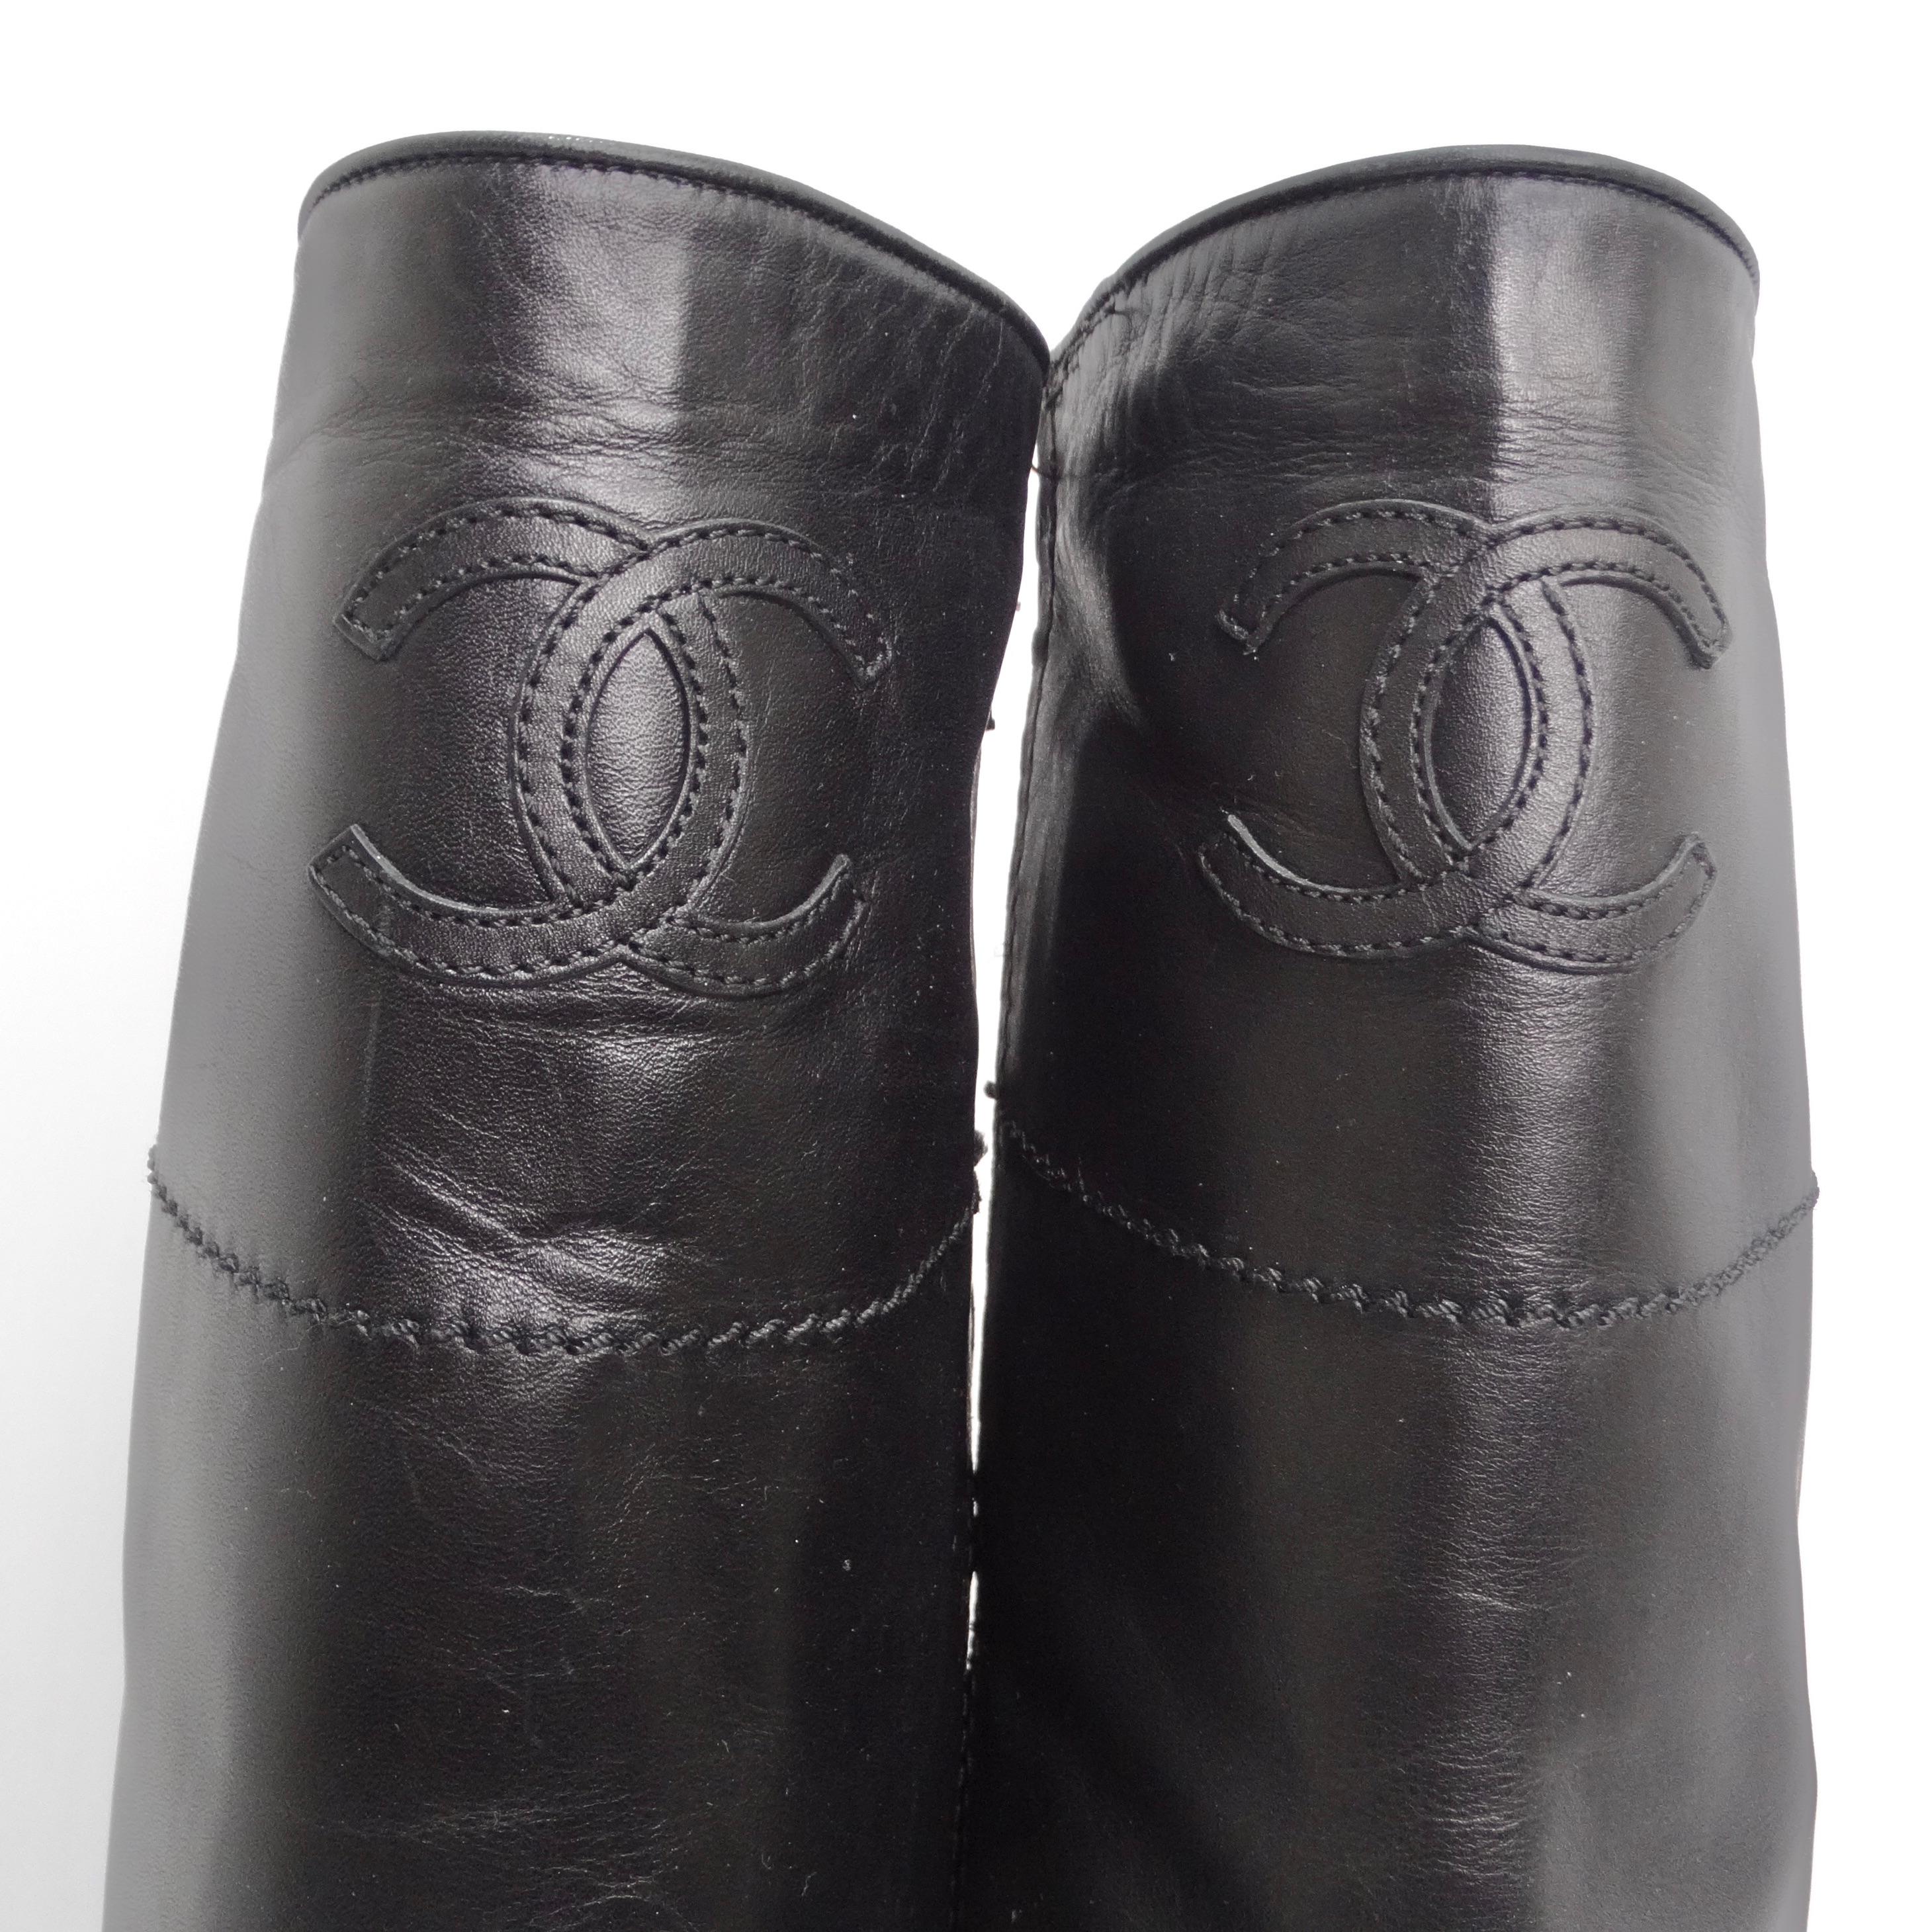 Chanel 2015 Interlocking CC Logo Black Leather Riding Boots In Good Condition For Sale In Scottsdale, AZ